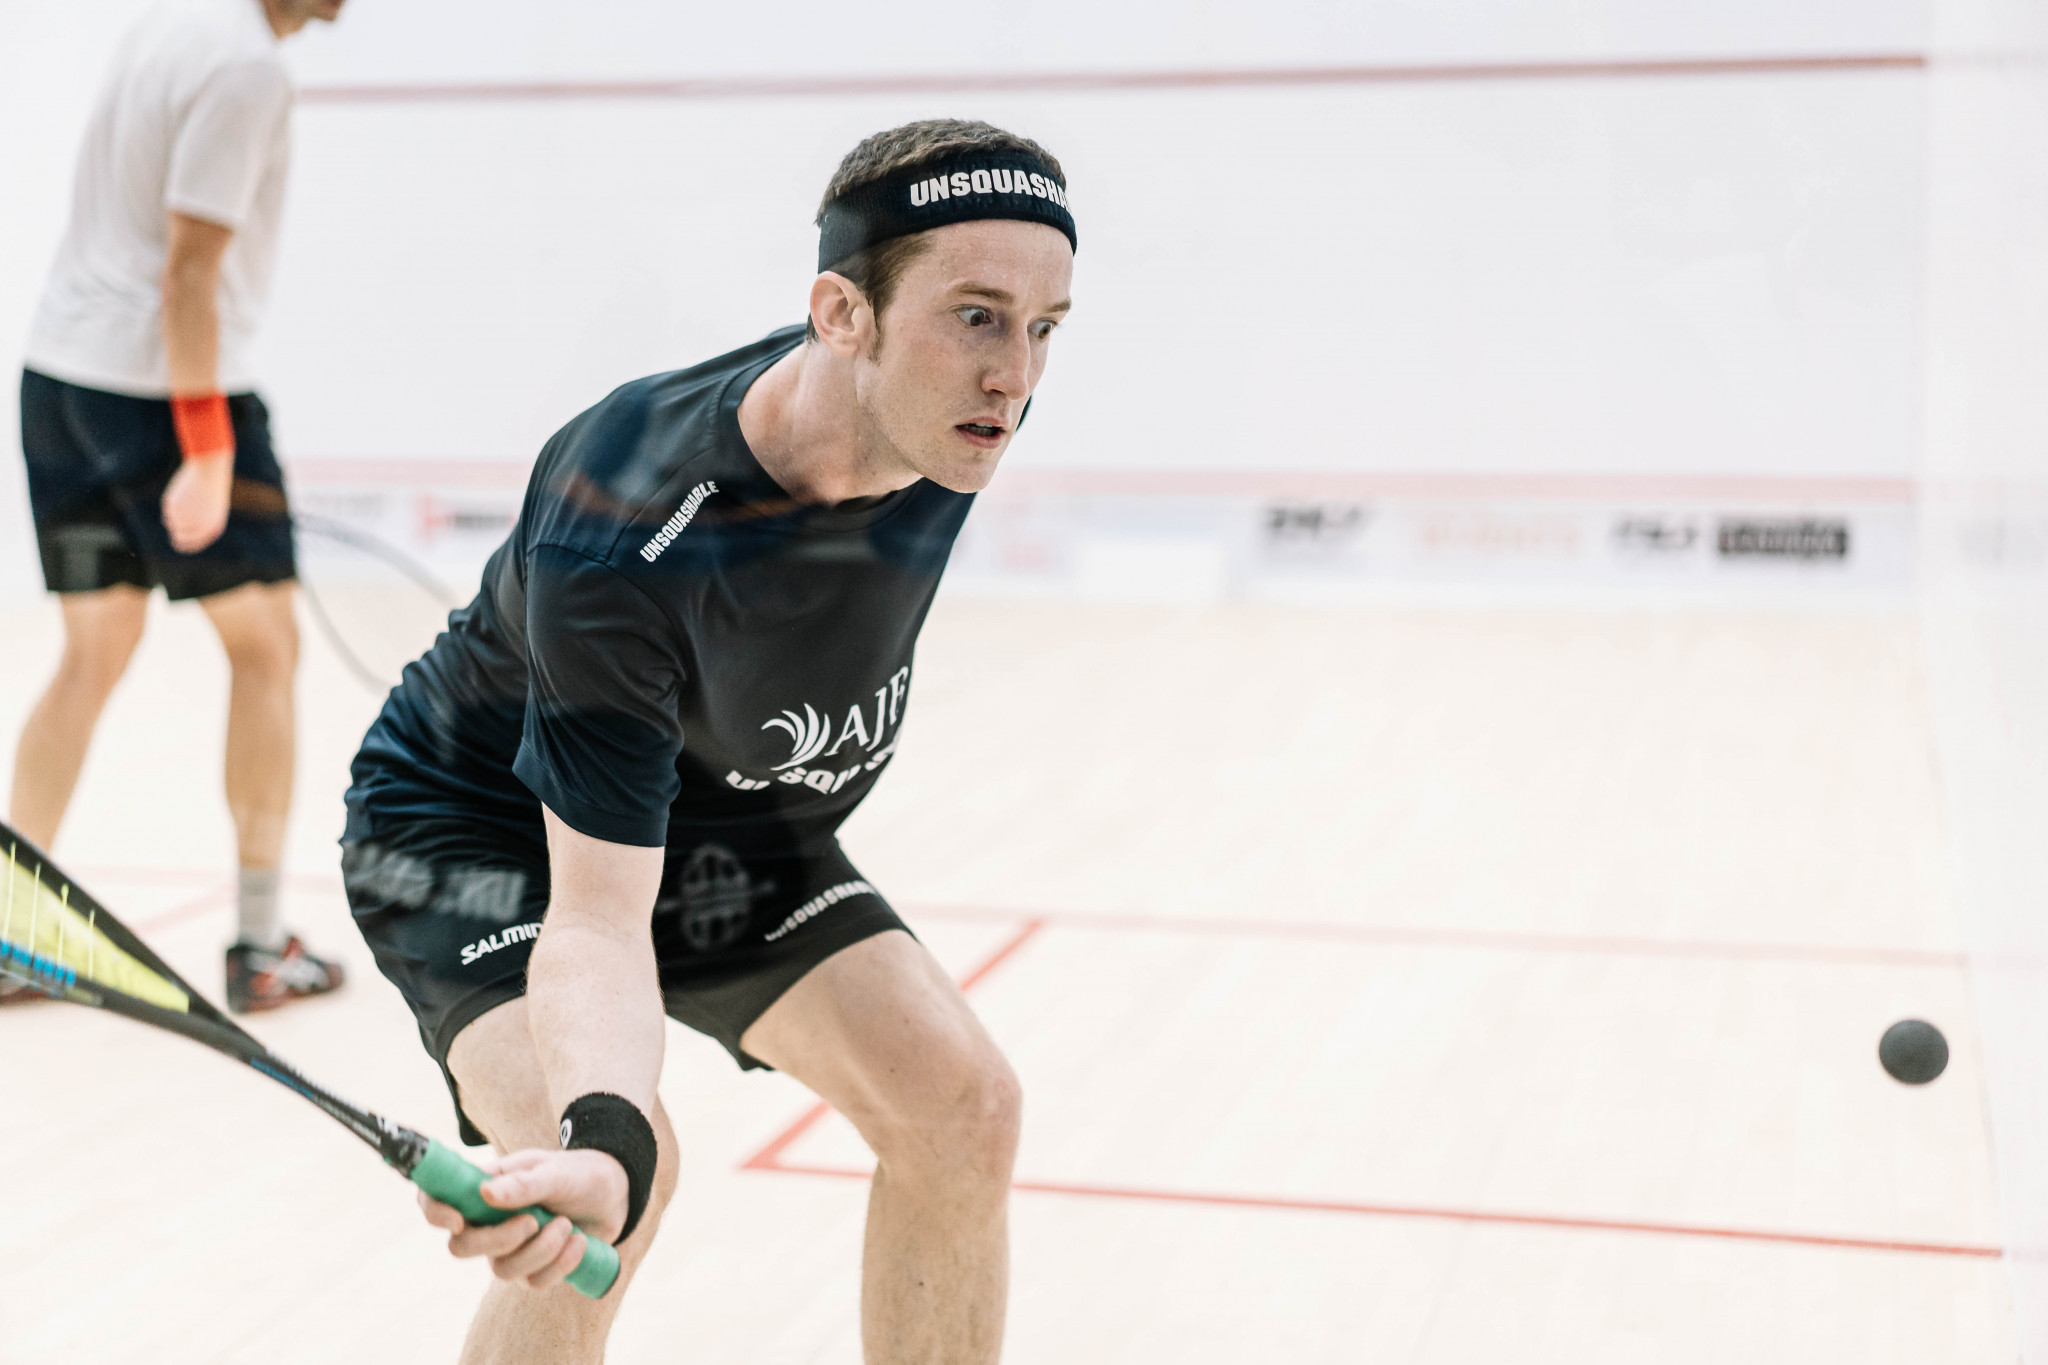 World number 62 Todd Harrity was one of the big winners on day one of the Egyptian Open ©PSA